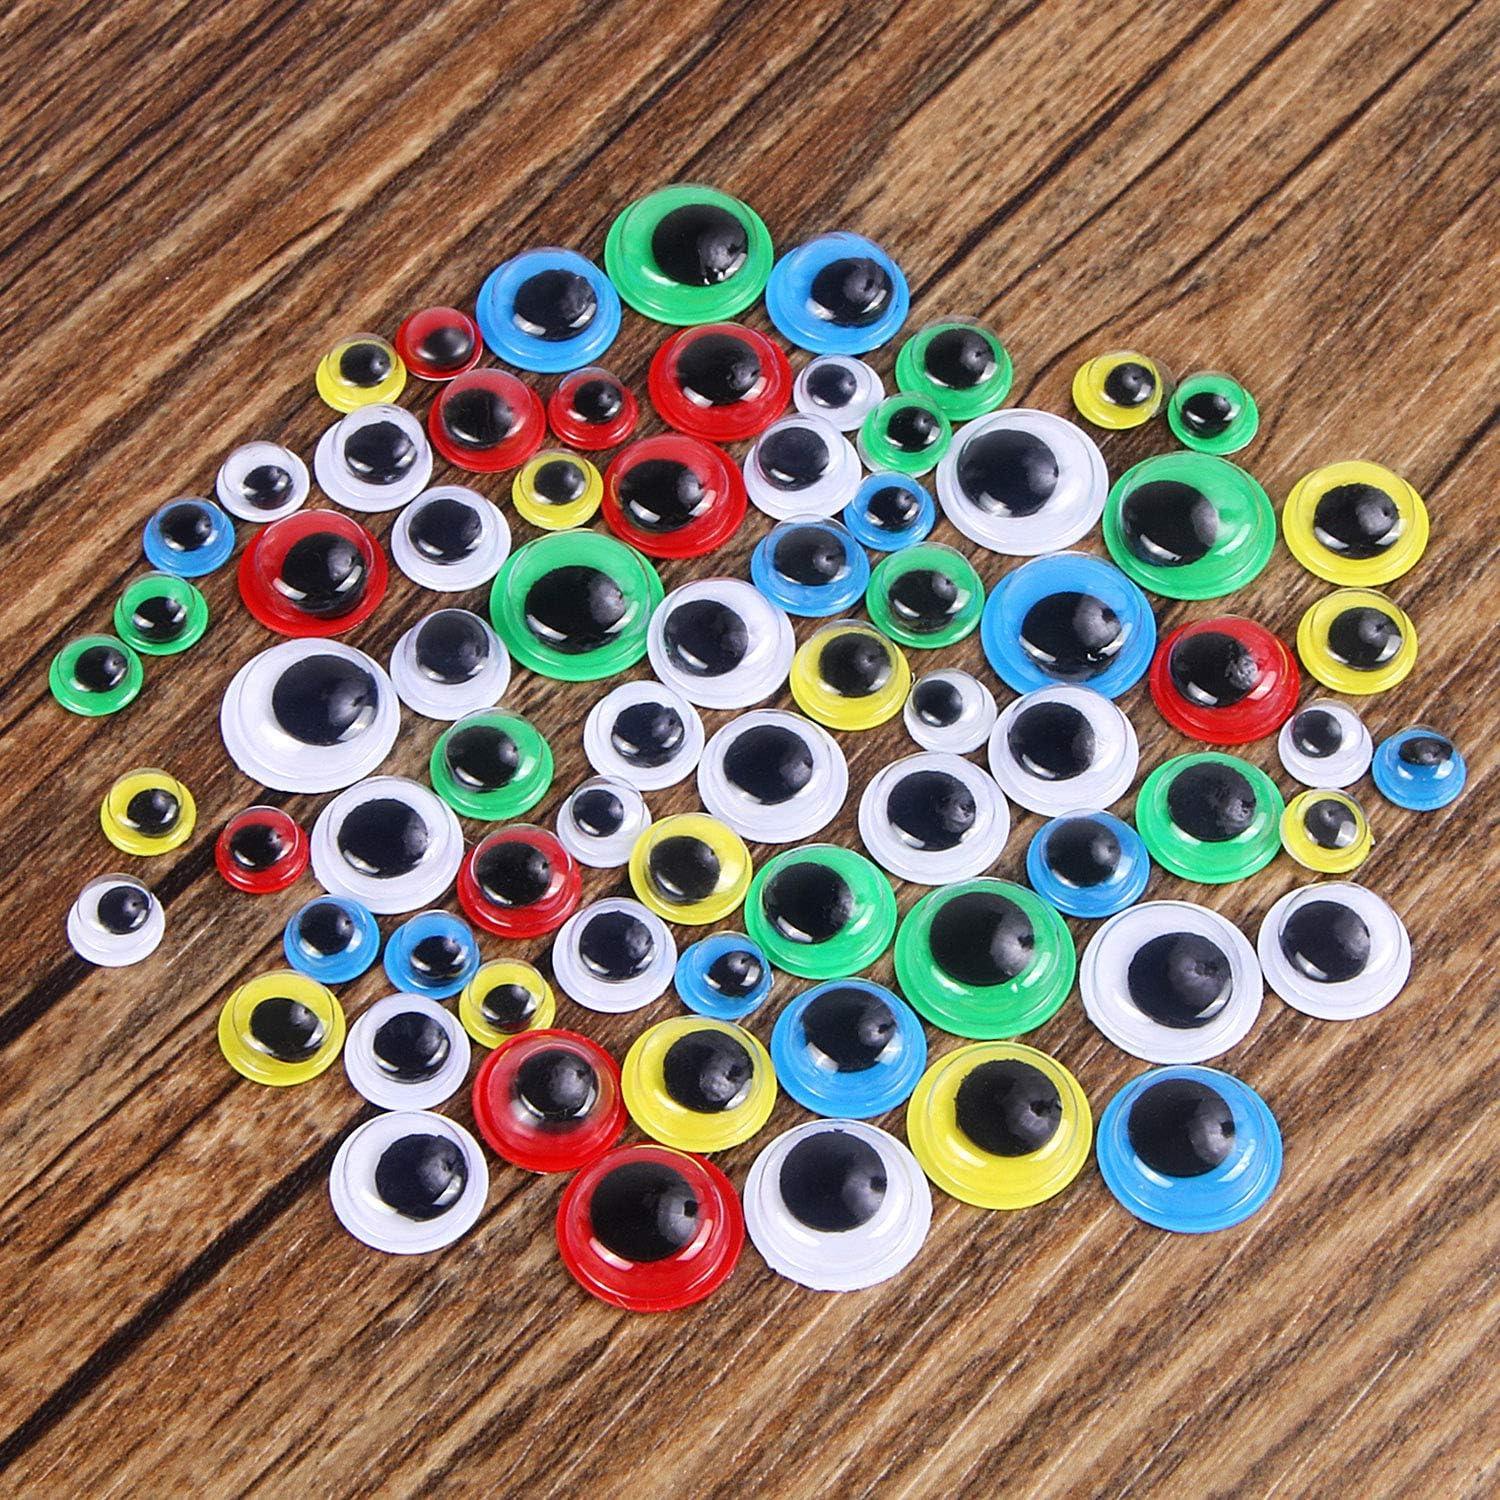  1000 Pcs Craft Eyes Self Adhesive Craft Stickers Wiggle Googly  Eyes Comes in Black and White and VariousSizes Google Eyes for Crafts DIY  Crafts Decoration (6/8/10/12mm) : 藝術、手工藝與縫紉